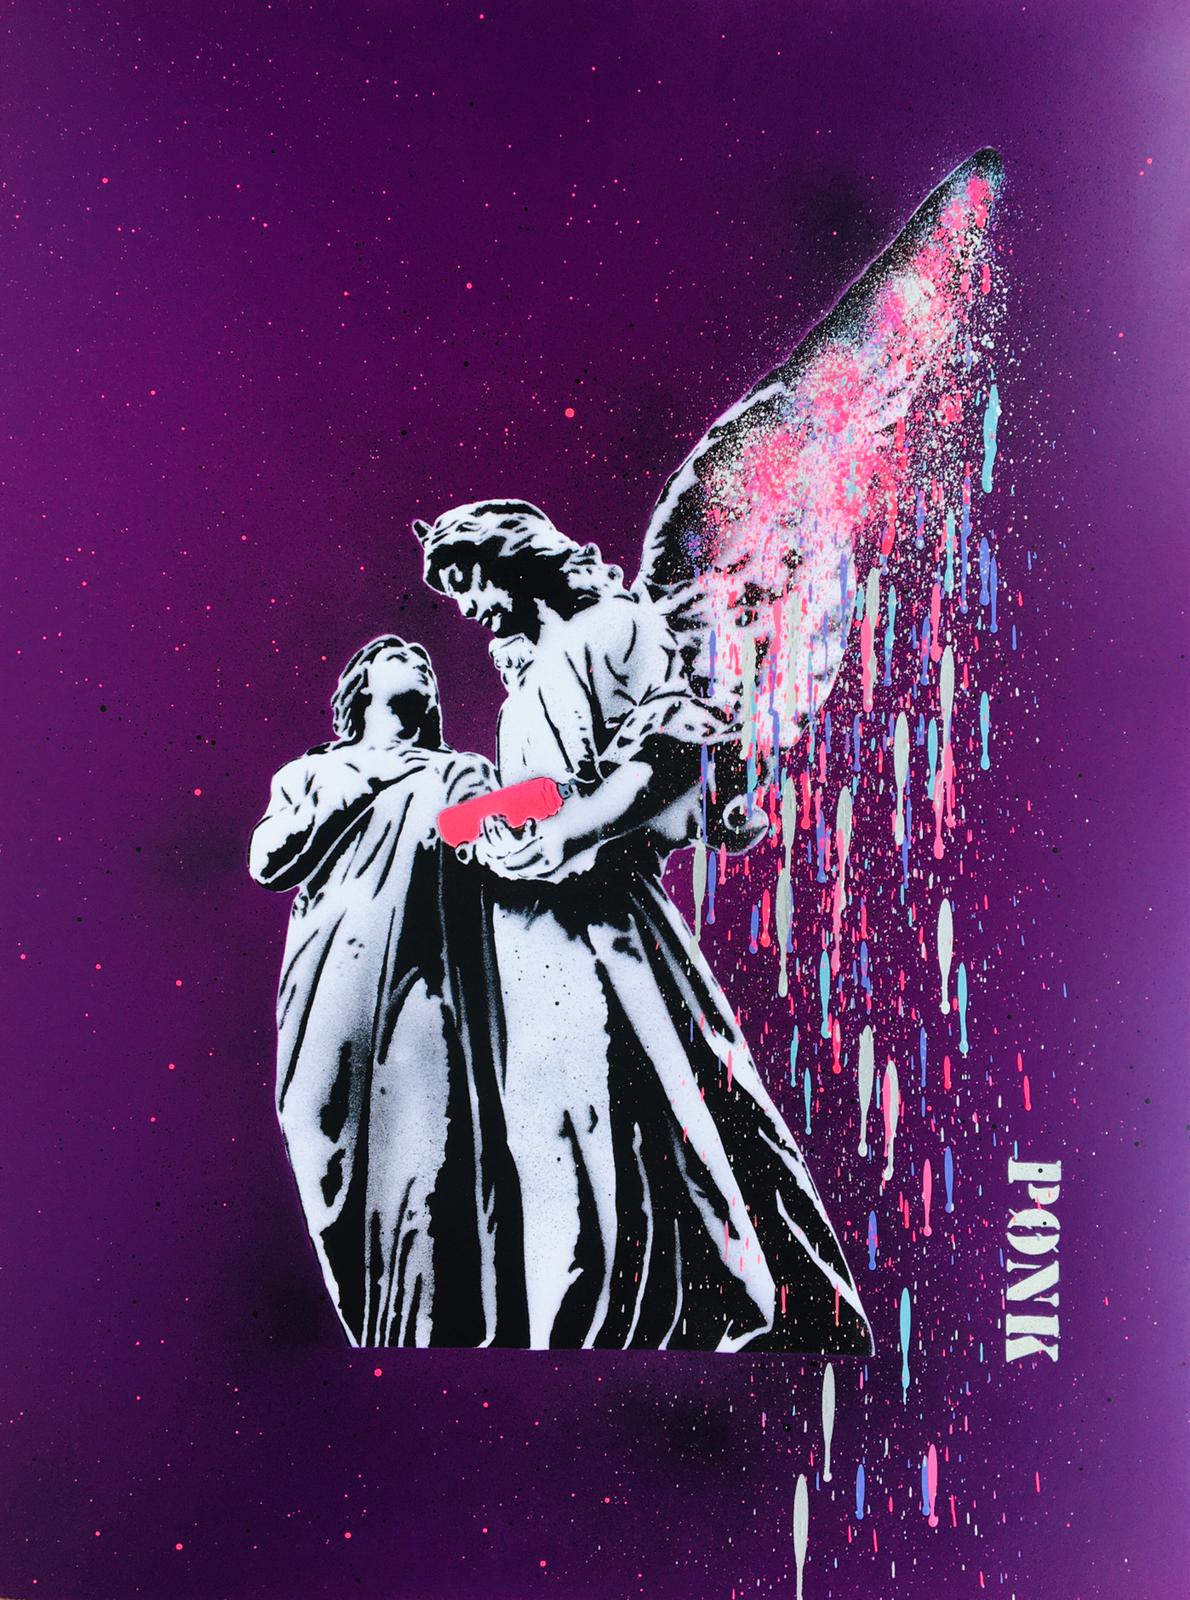 Spray for Love - 1/1 Editions